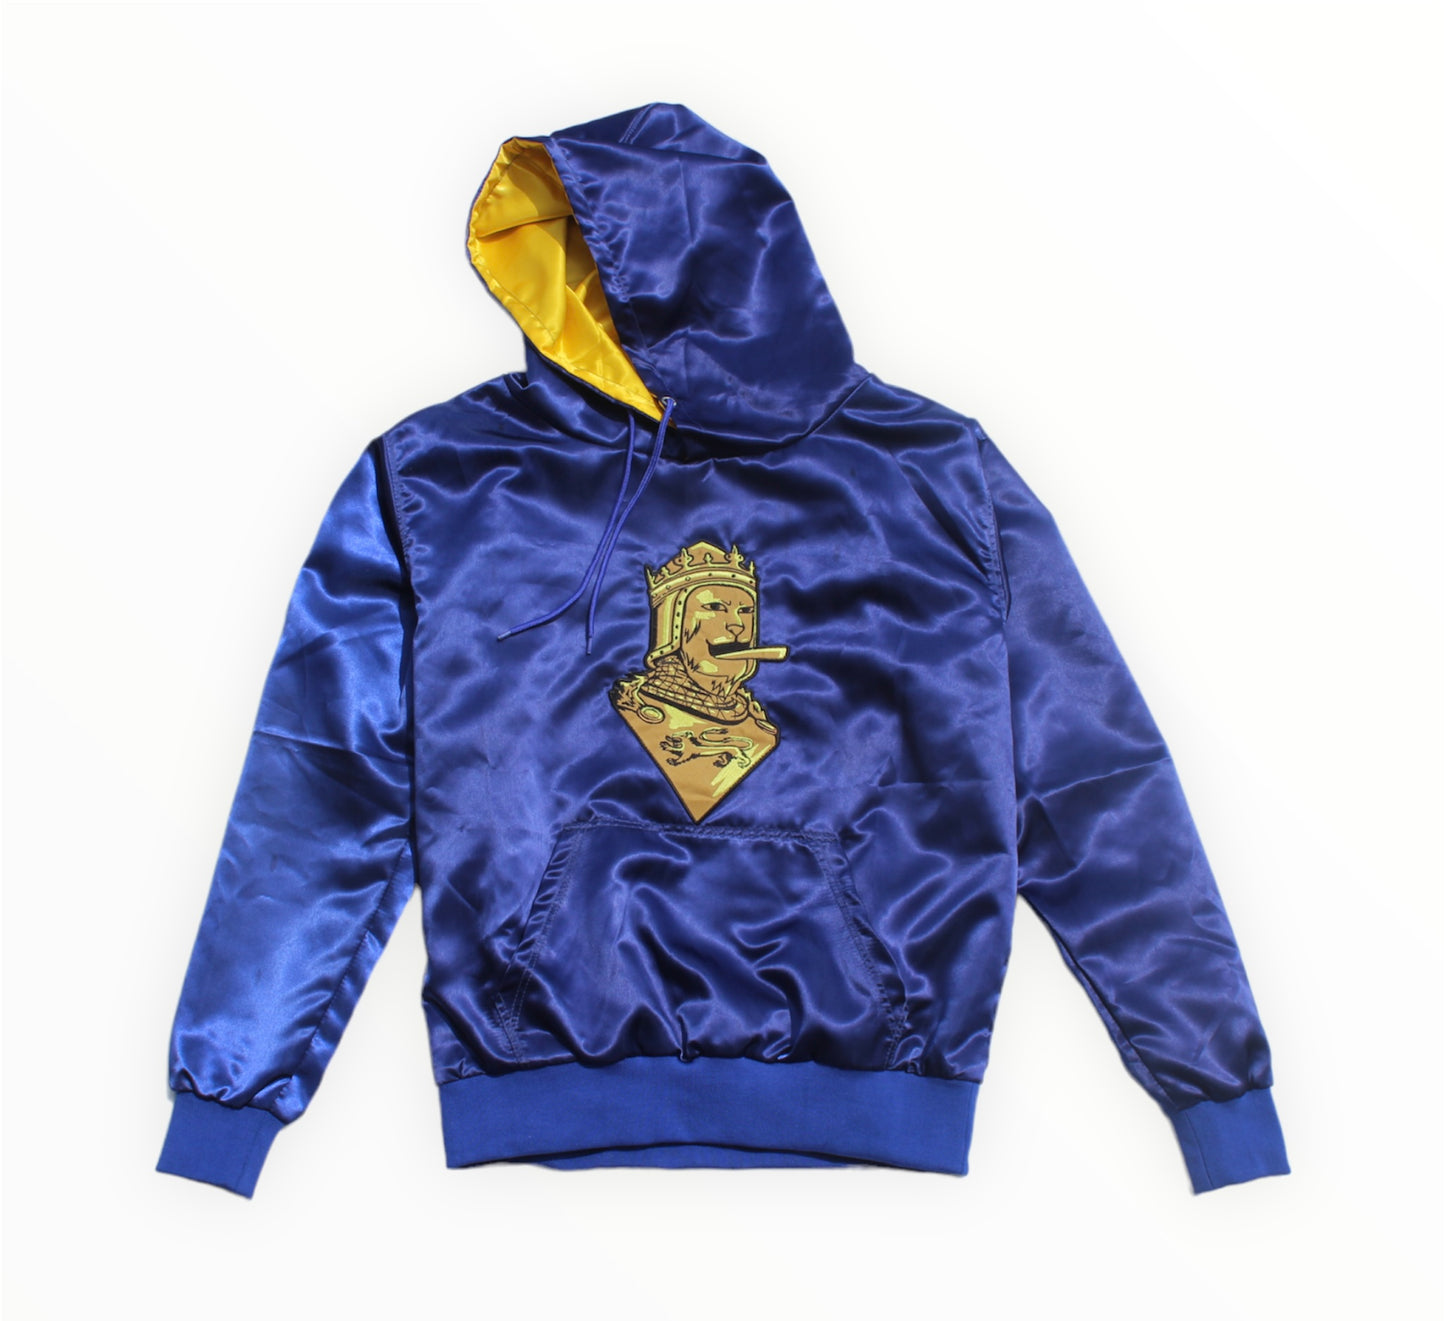 Royalty10 Lion Heart Golden Divine Pullover Satin Hoodie in Royal Blue: A stunning royal blue hoodie from the exclusive Royalty10 collection, featuring the iconic Lion Heart Golden Divine design. This pullover satin hoodie exudes style and luxury, with its smooth and shiny fabric. Elevate your fashion game with the Royalty10 Lion Heart Golden Divine Pullover Satin Hoodie in royal blue.